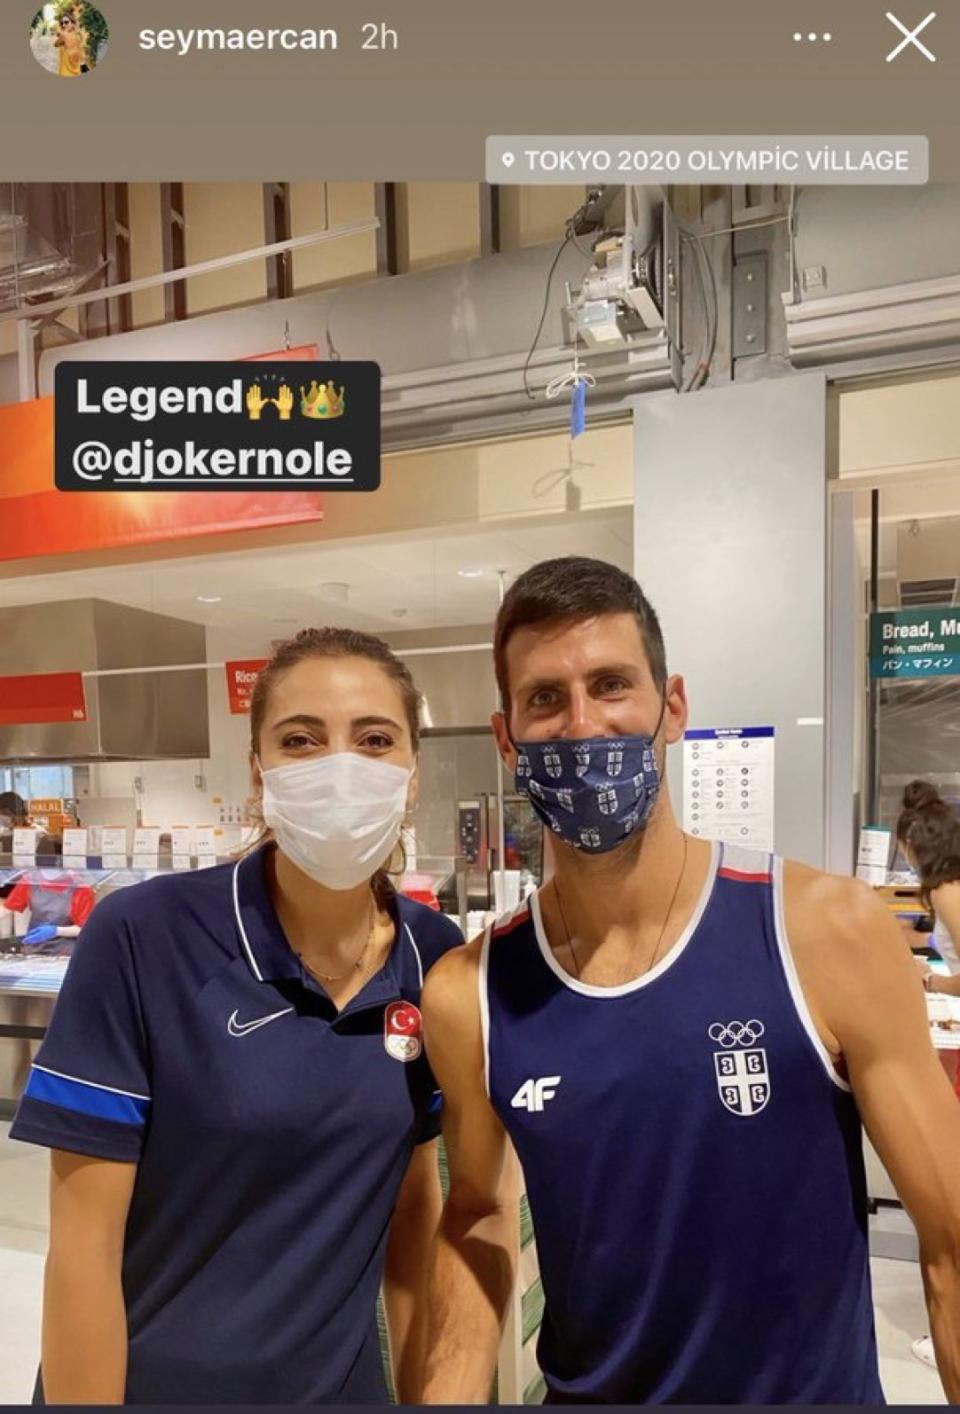 Seyma Ercan from the Turkish volleyball team also posted a photo of her and Djokovic on her Instagram story. (Photo courtesy of @seymaercan/Instagram)